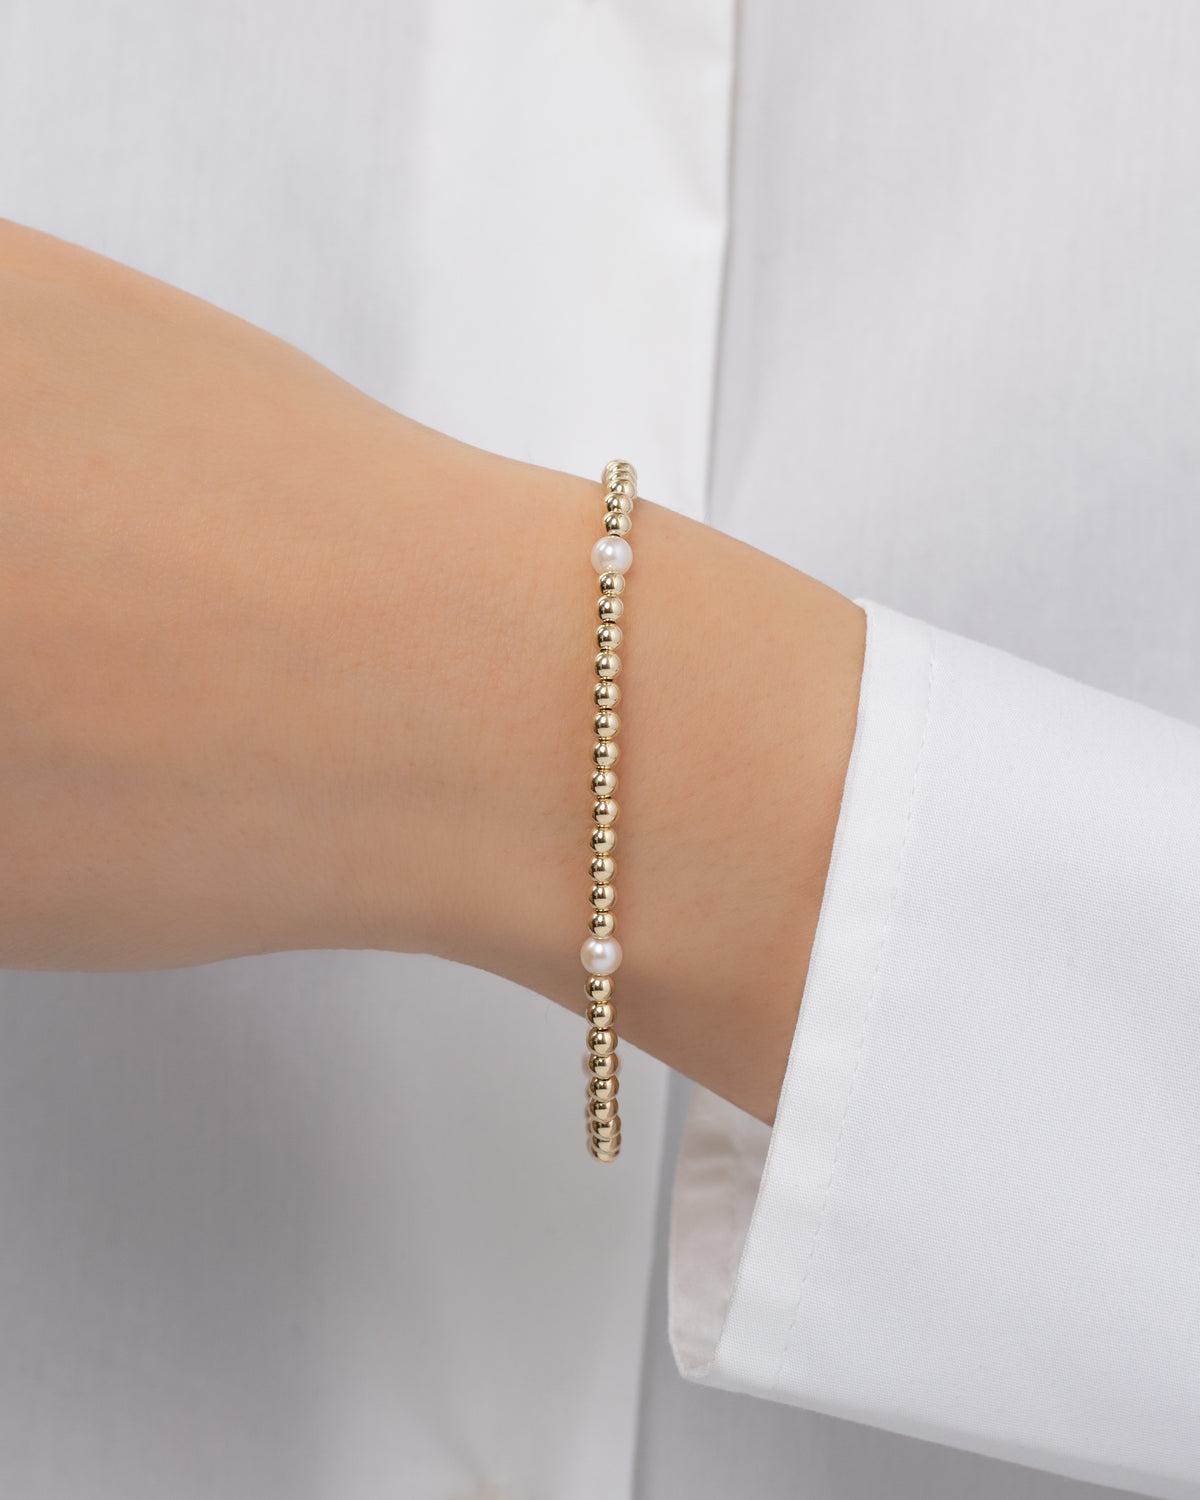 3mm Gold Segment Bead Bracelet with Pearl Beads